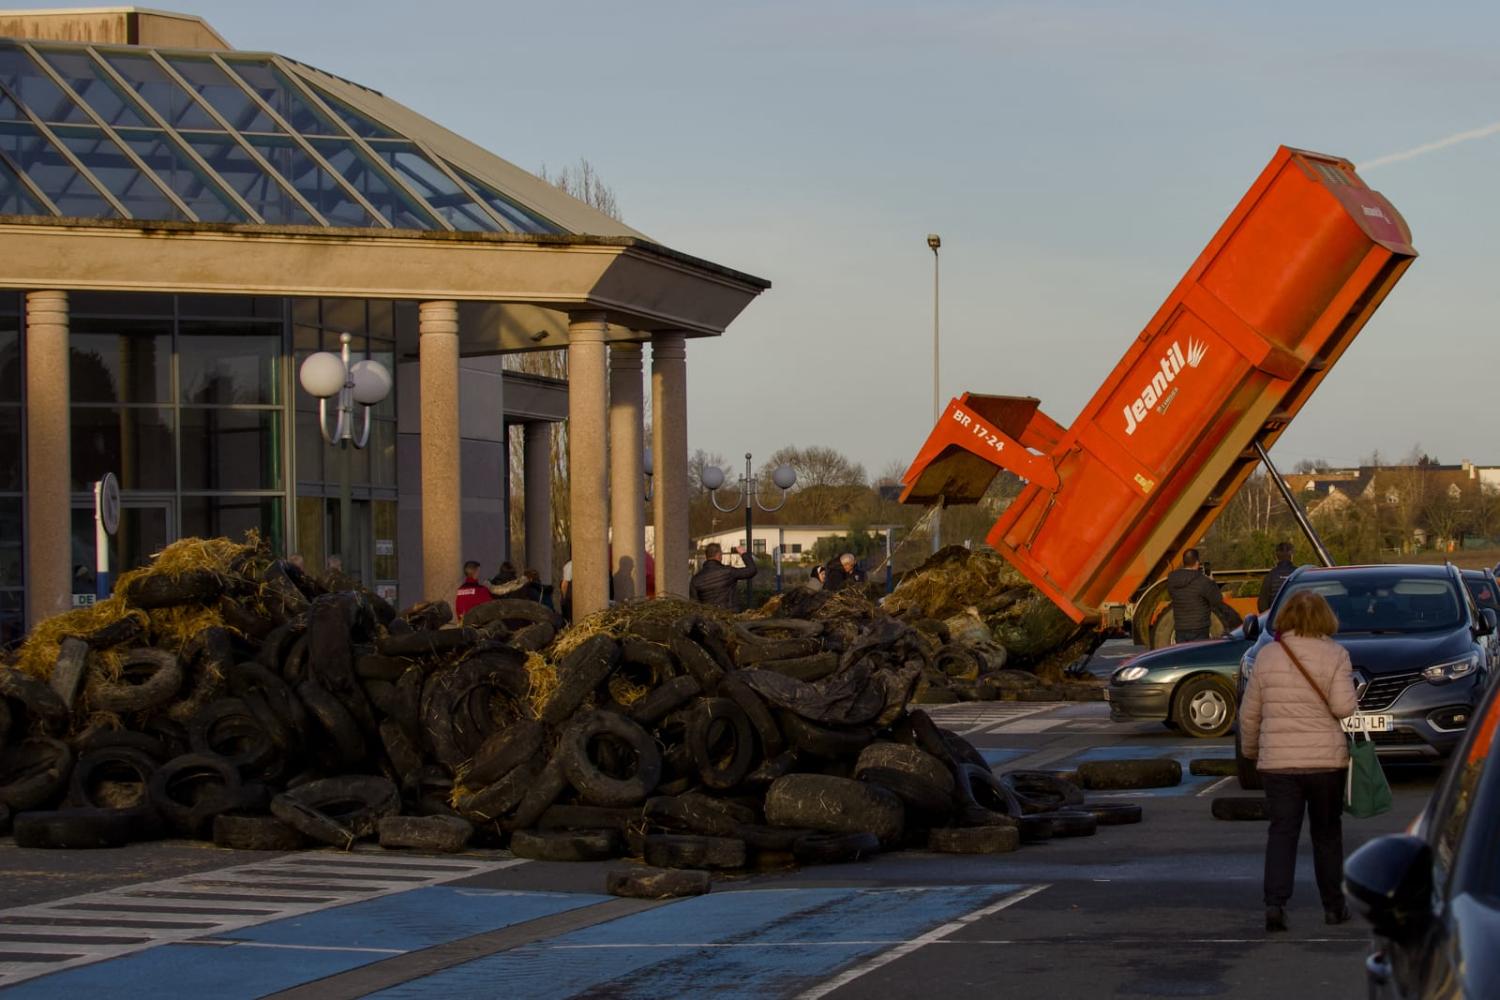 Farmers unload manure to block a supermarket entrance in Le Mans, northwestern France, to protest costs and regulations (Guillaume Souvant/AFP via Getty Images)